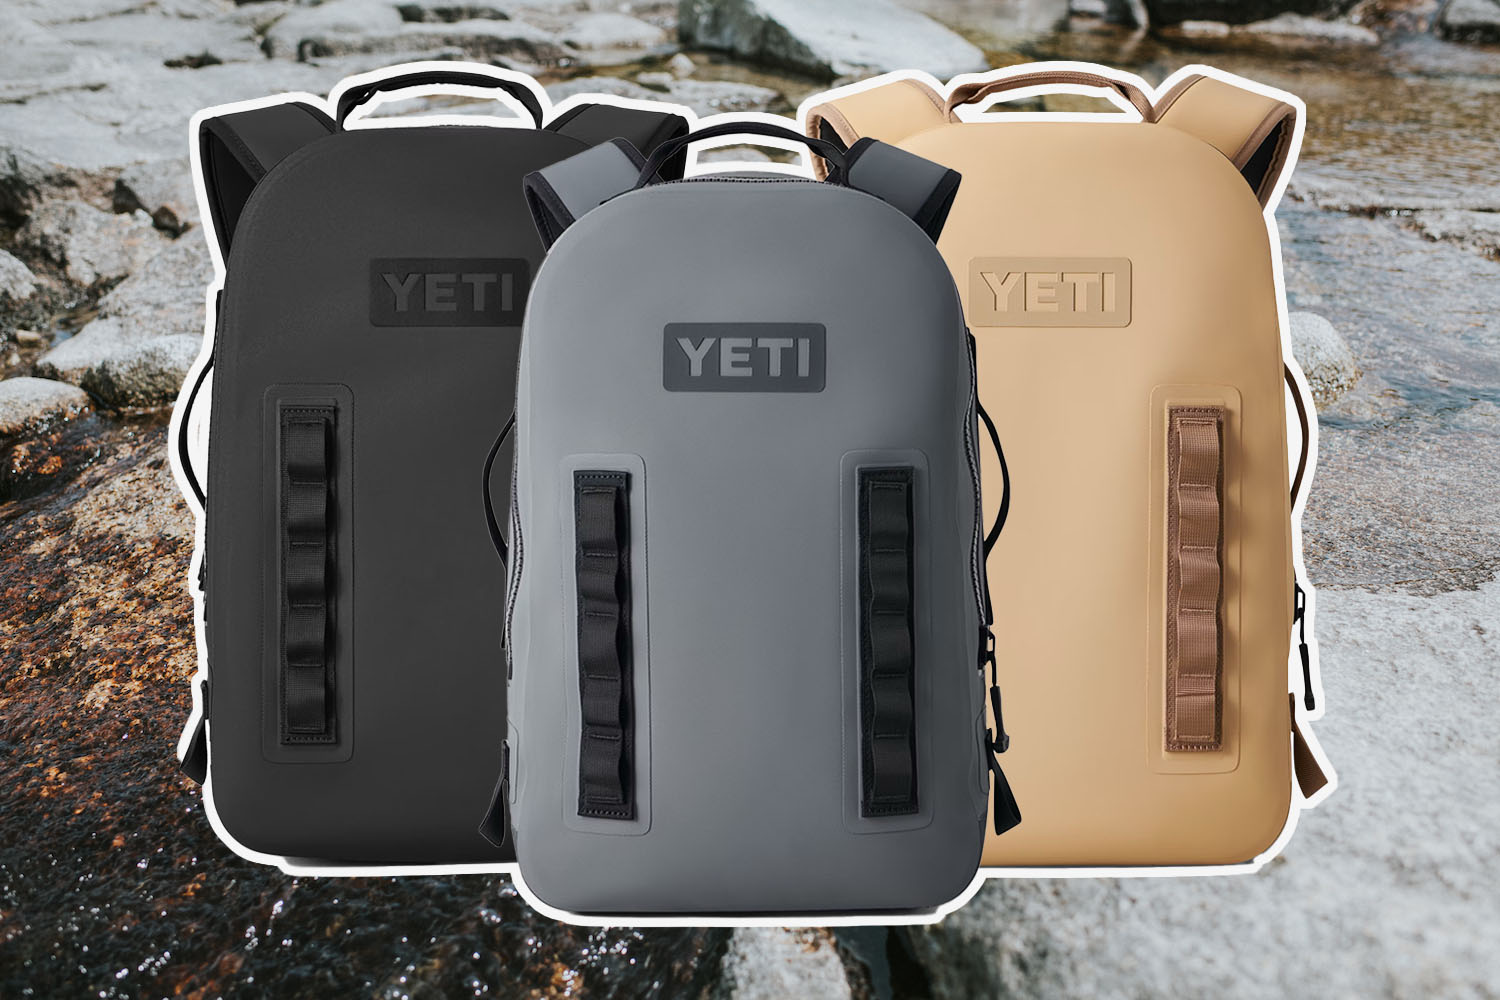 https://www.insidehook.com/wp-content/uploads/2023/11/Yeti-Pagna-Backpack-Review.jpg?fit=1500%2C1000